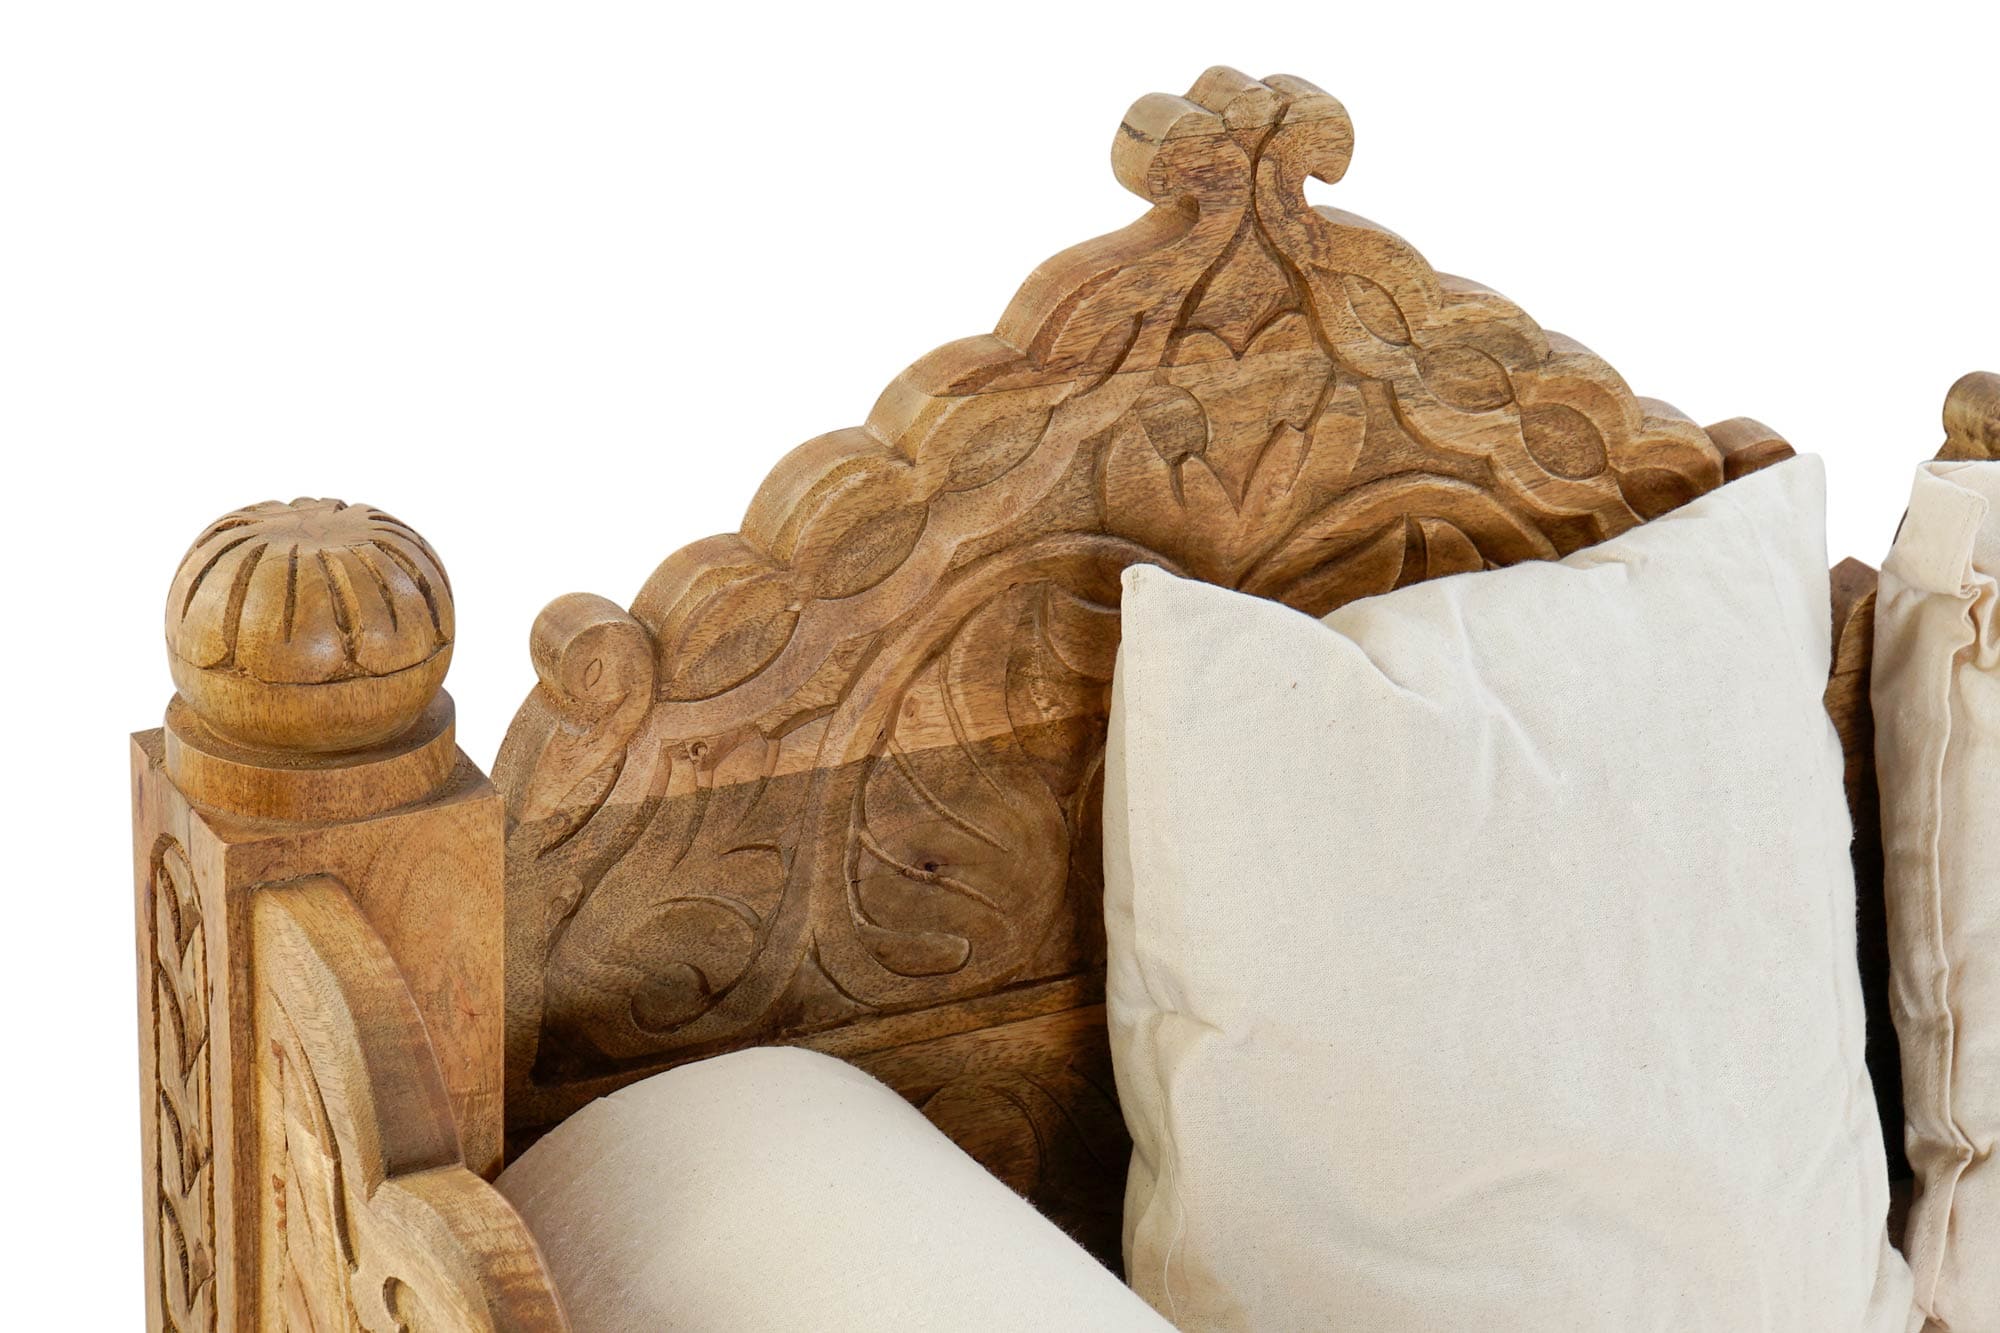 Oriental Design Sofa in Carved Mango Wood and White Cushions (190 x 77 x 90 cm)